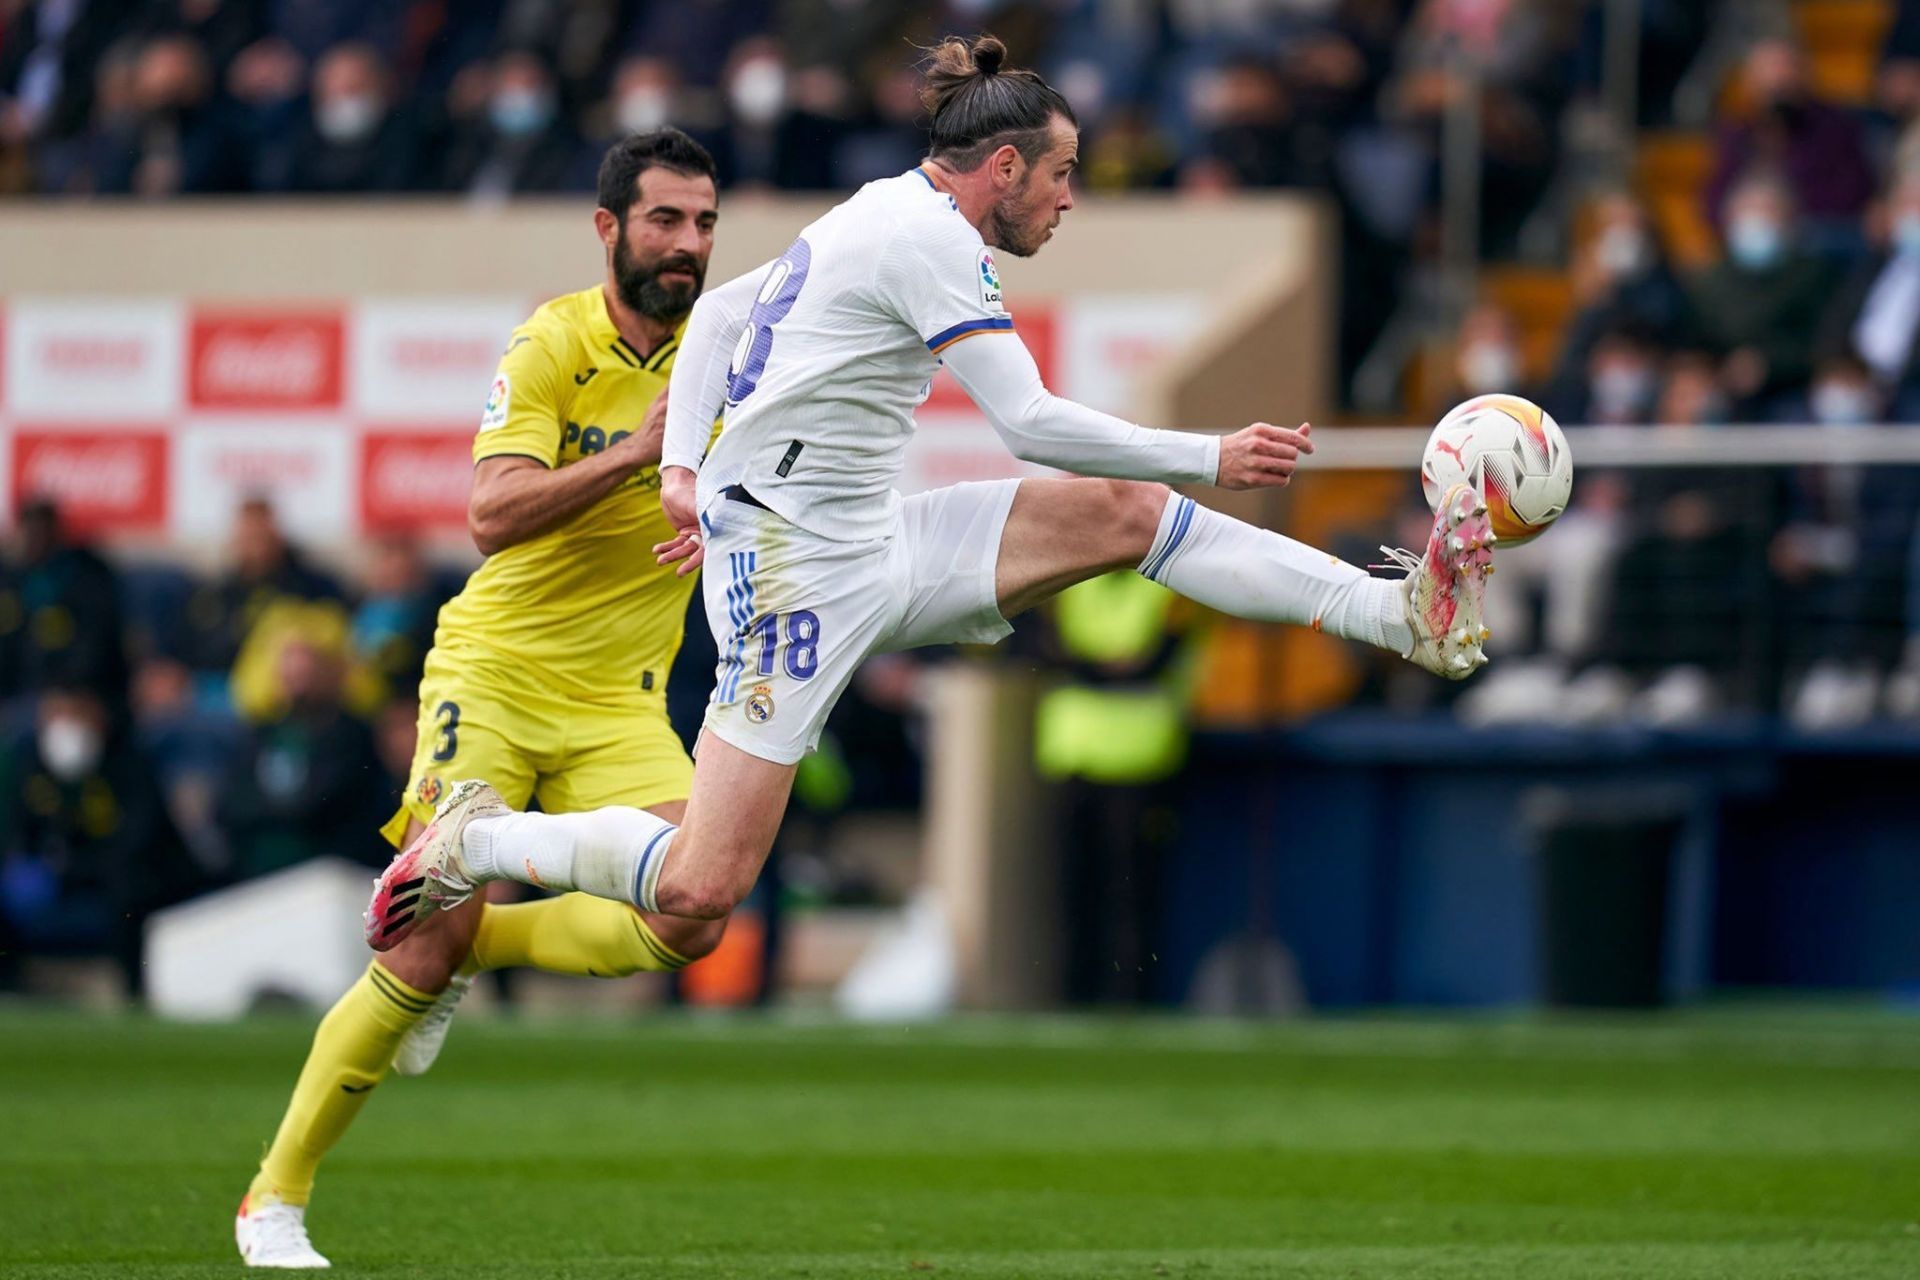 Real Madrid were unable to find a way past Villarreal